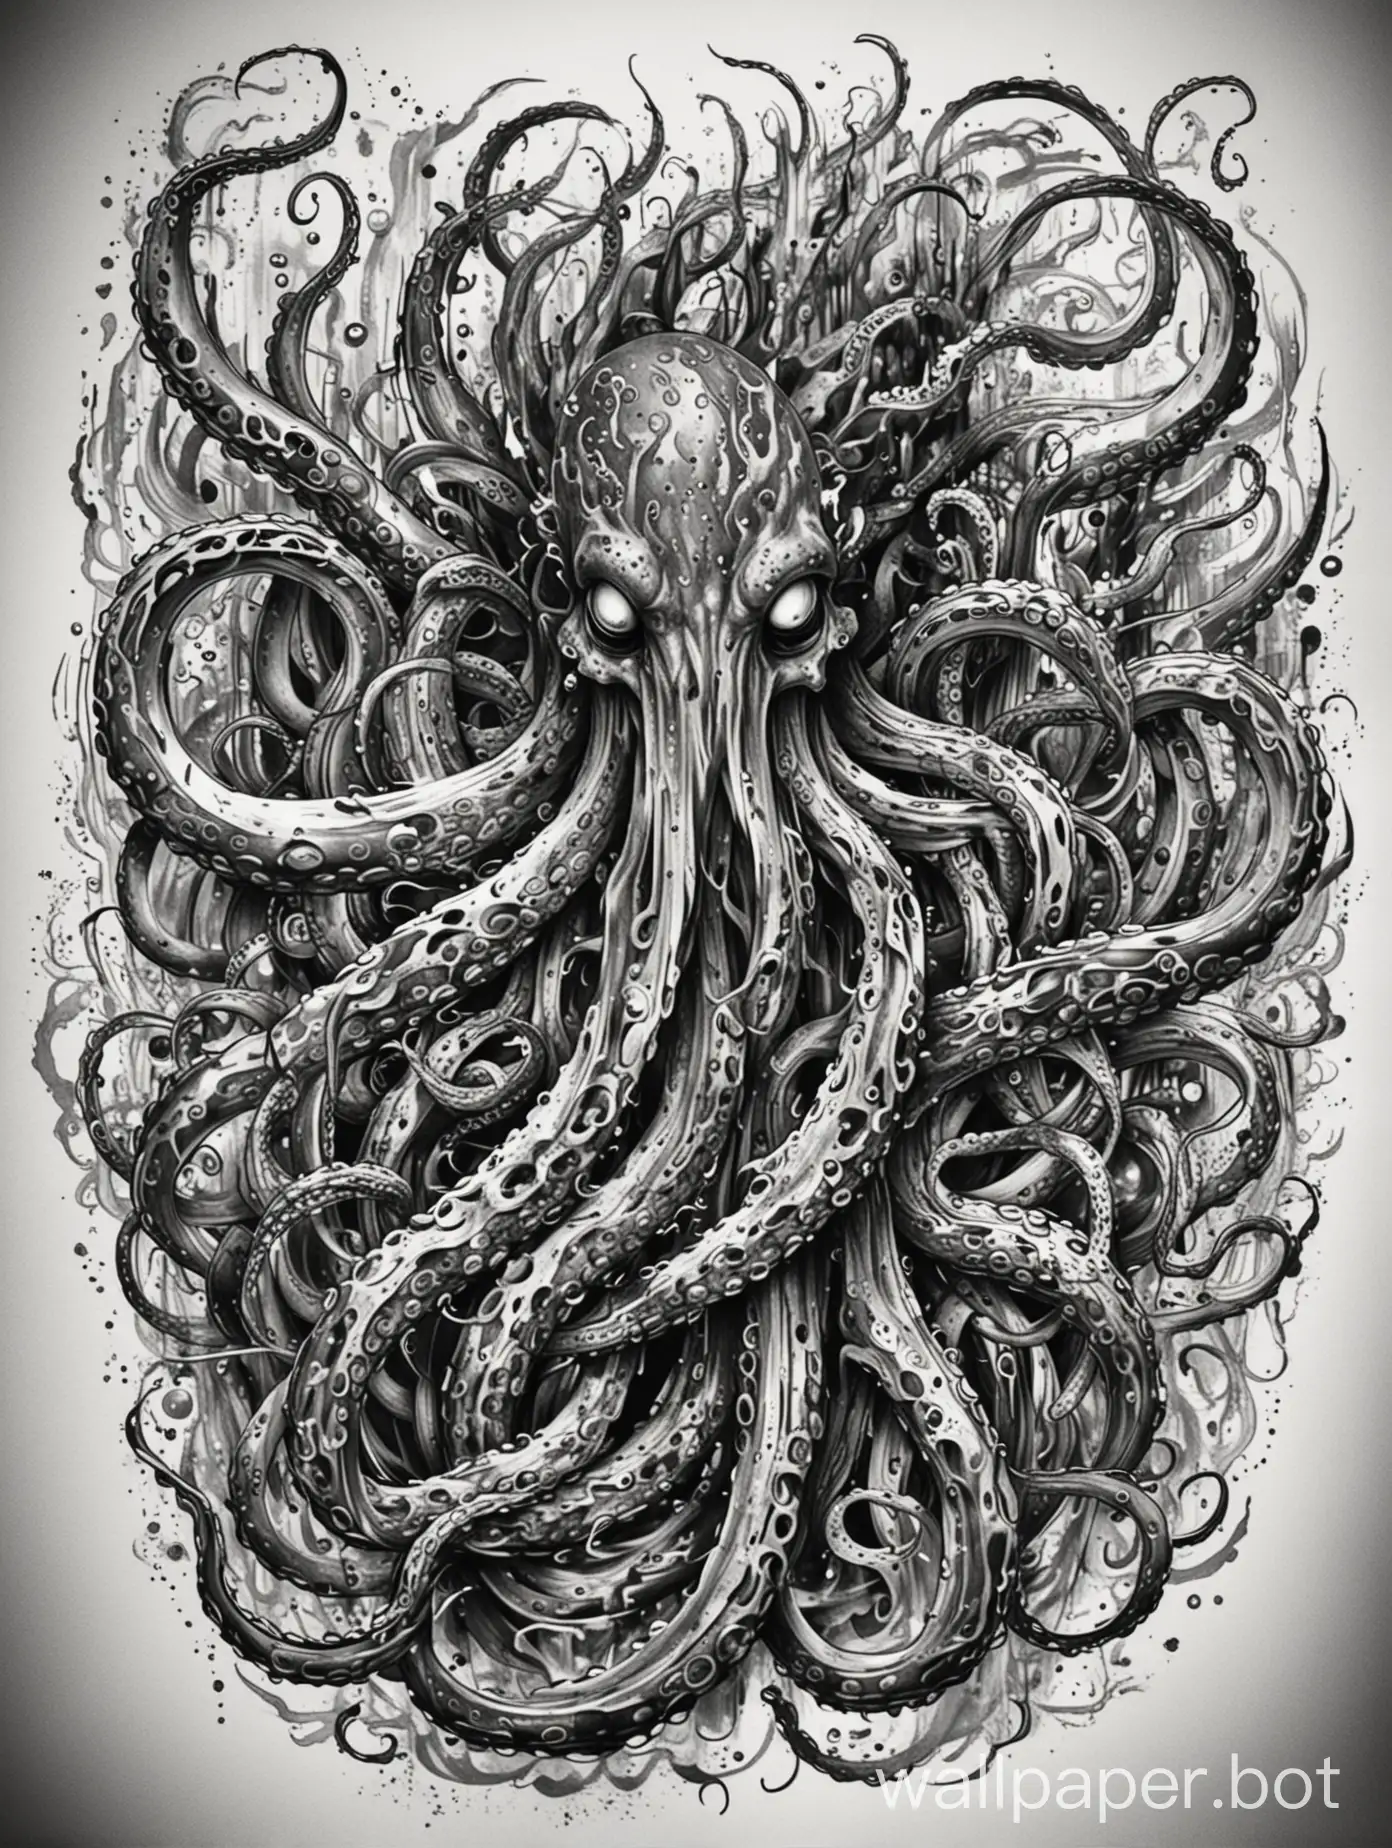 Monochromatic-Abstract-Tattoo-Fiery-Black-Tentacles-in-Explosive-Motion